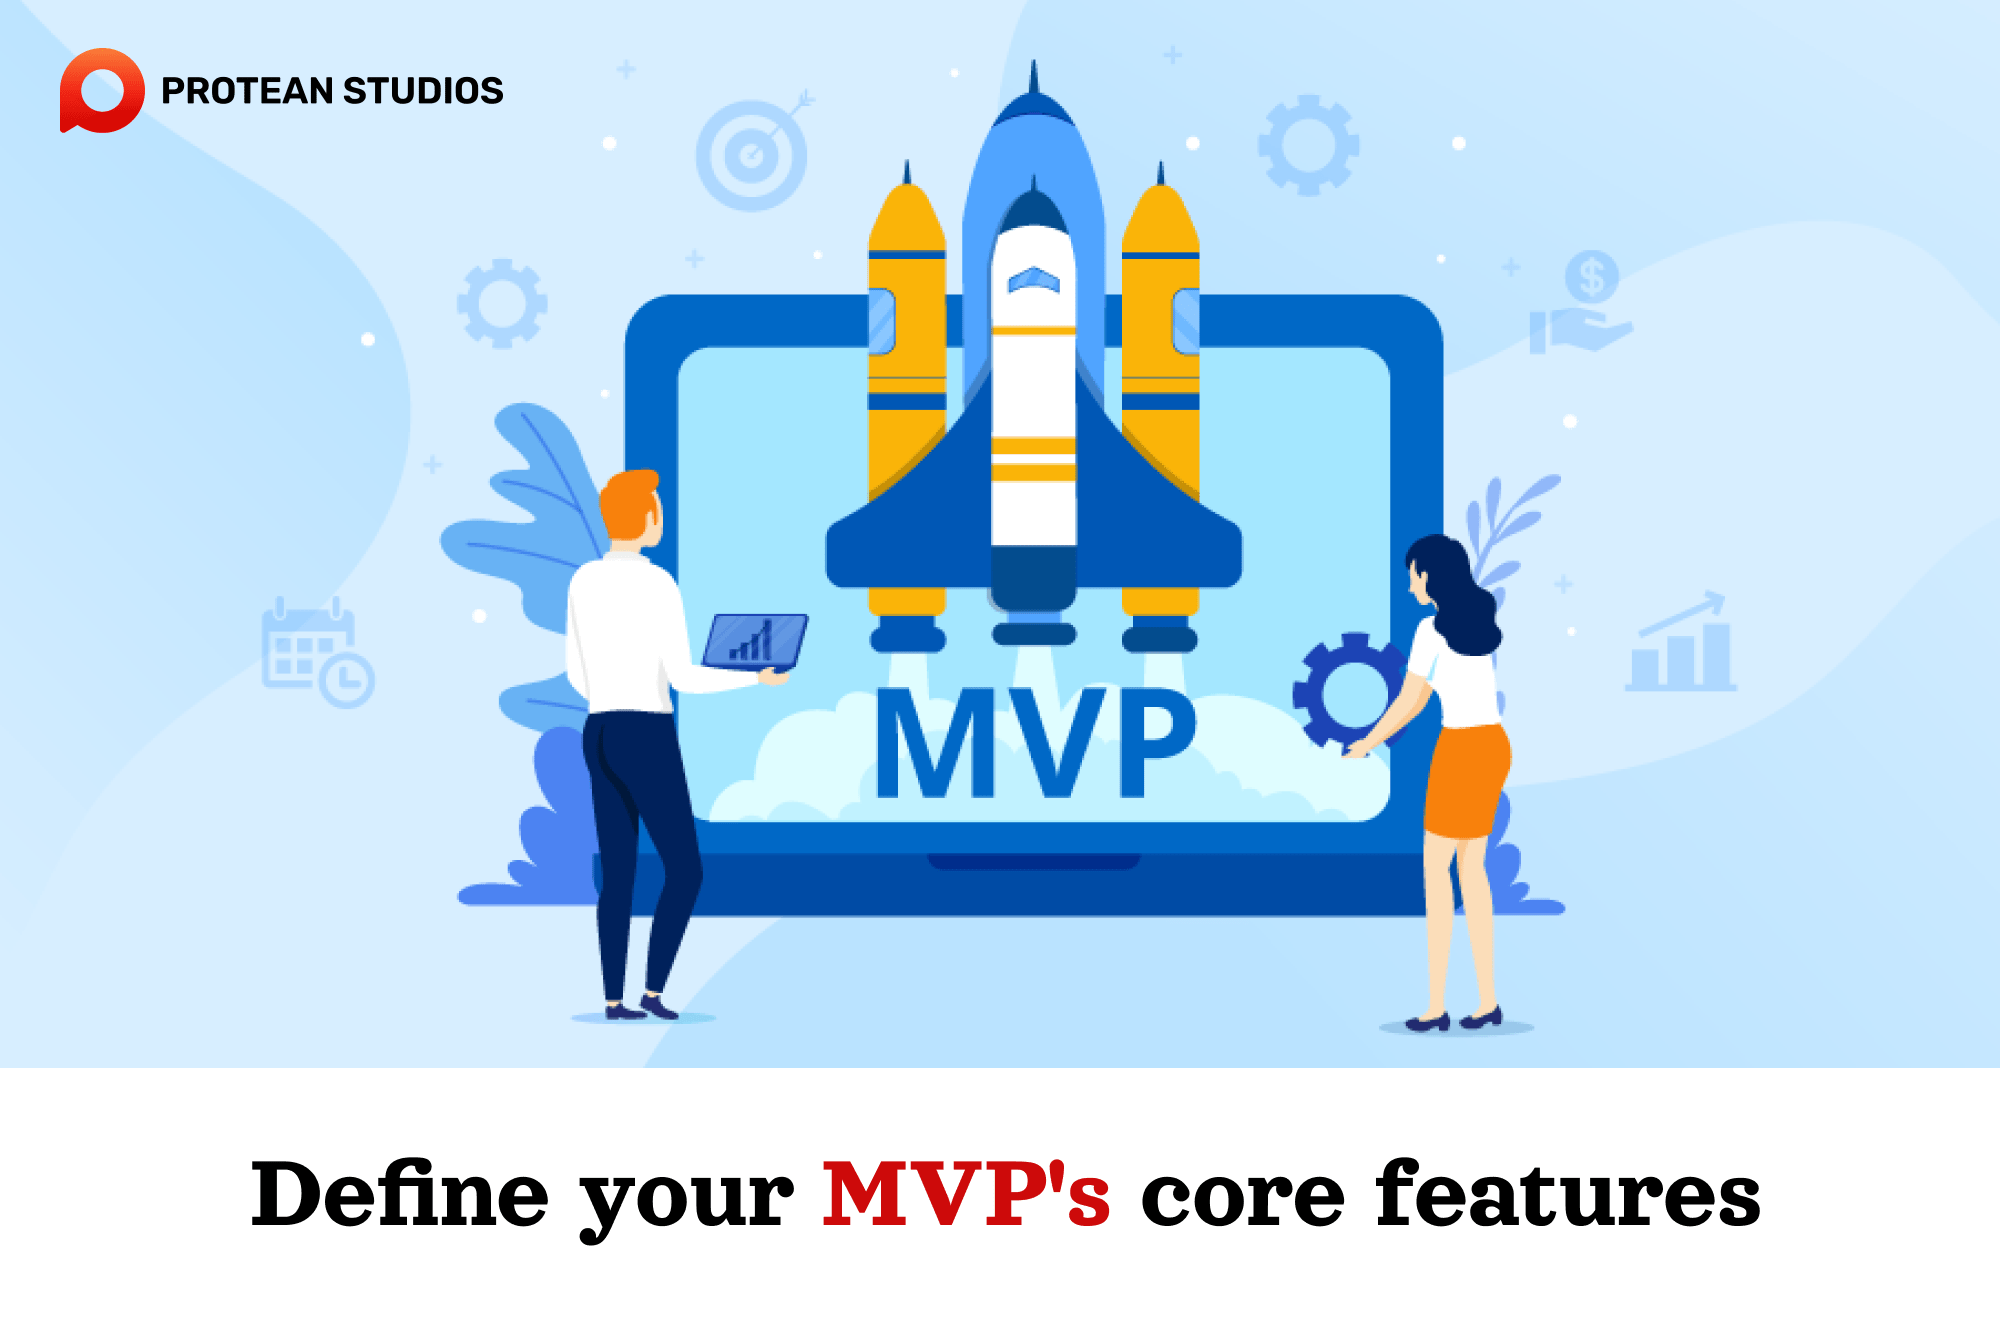 The third step to building a good MVP